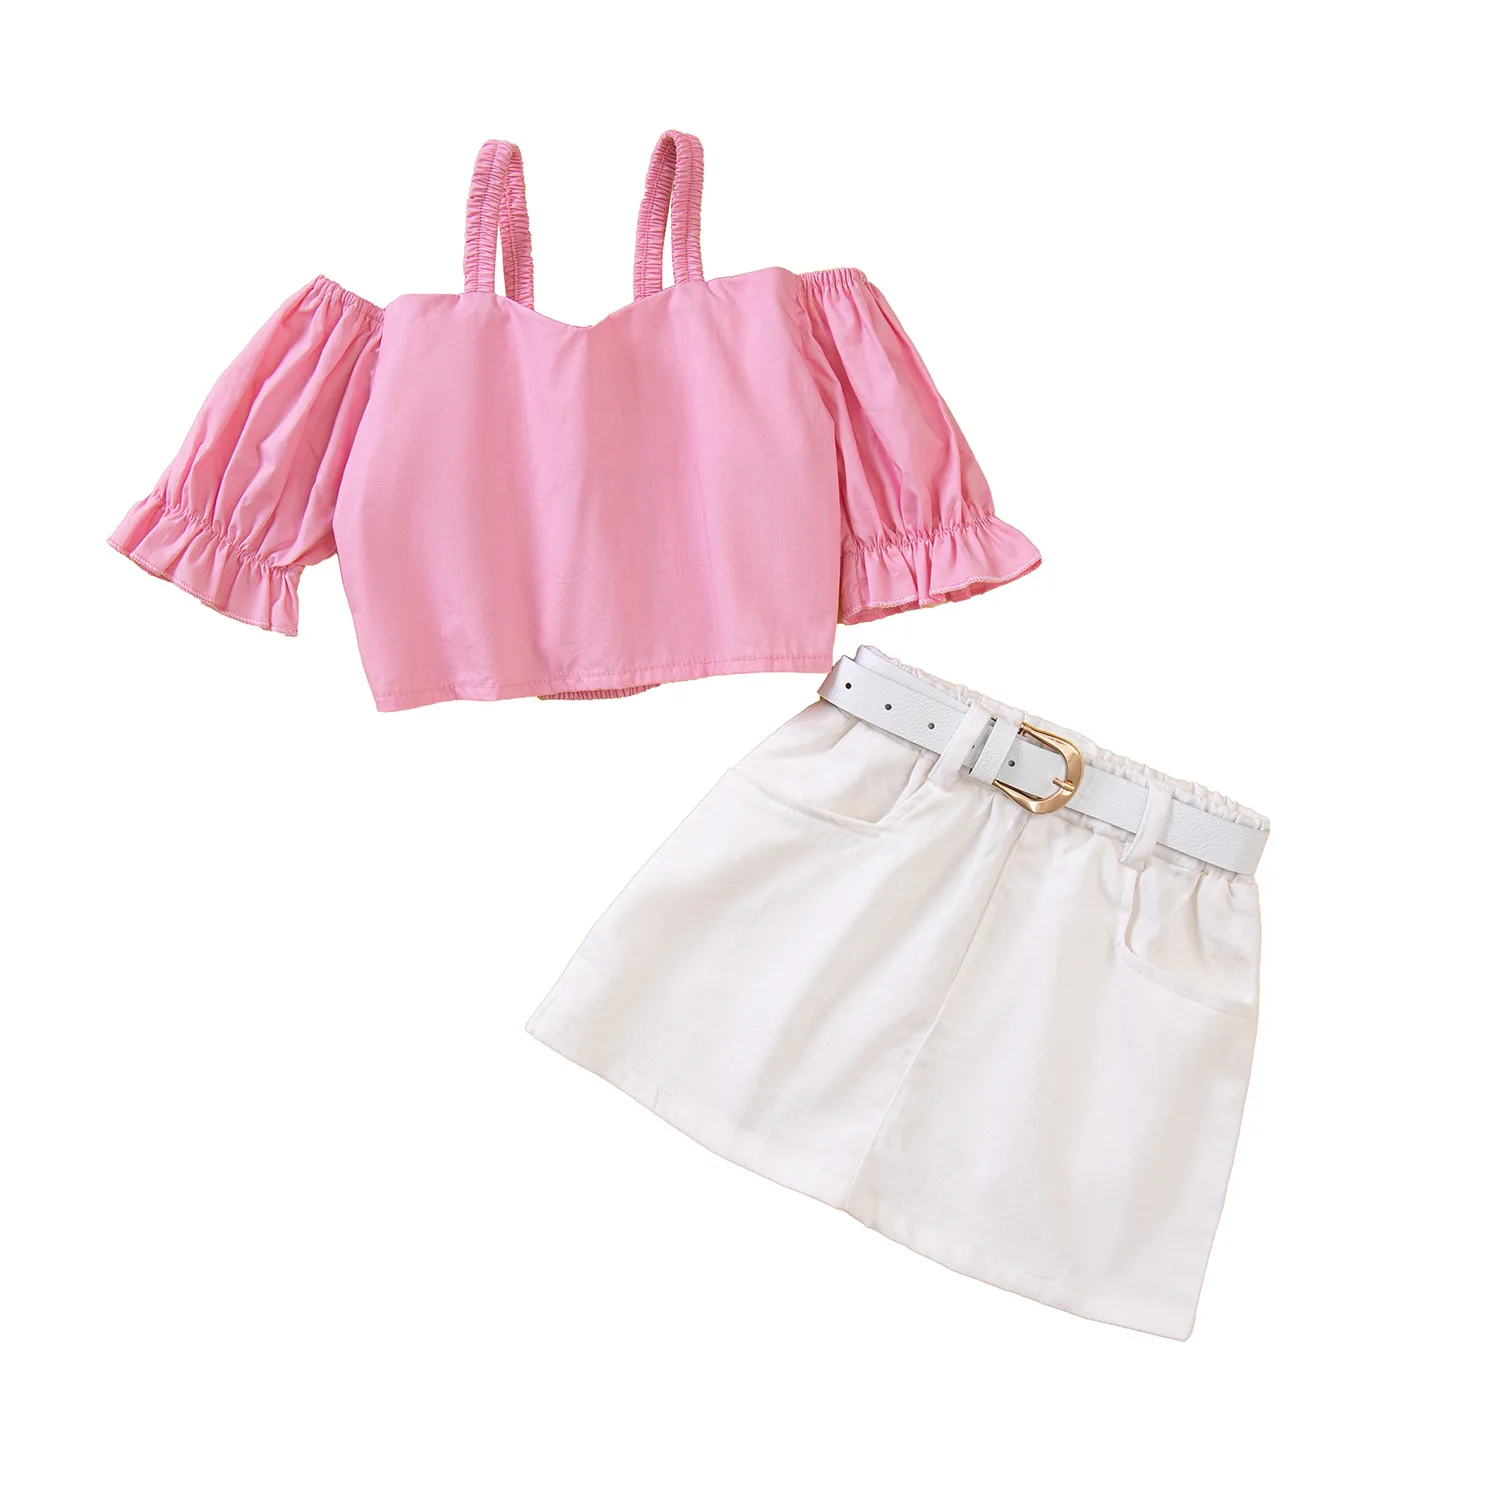 

2Piece Girls Summer Clothes Fashion Puff Sleeves Cotton Pink Baby T-shirt Two Piece Skirt Set Boutique Kids Clothing BC2194-1